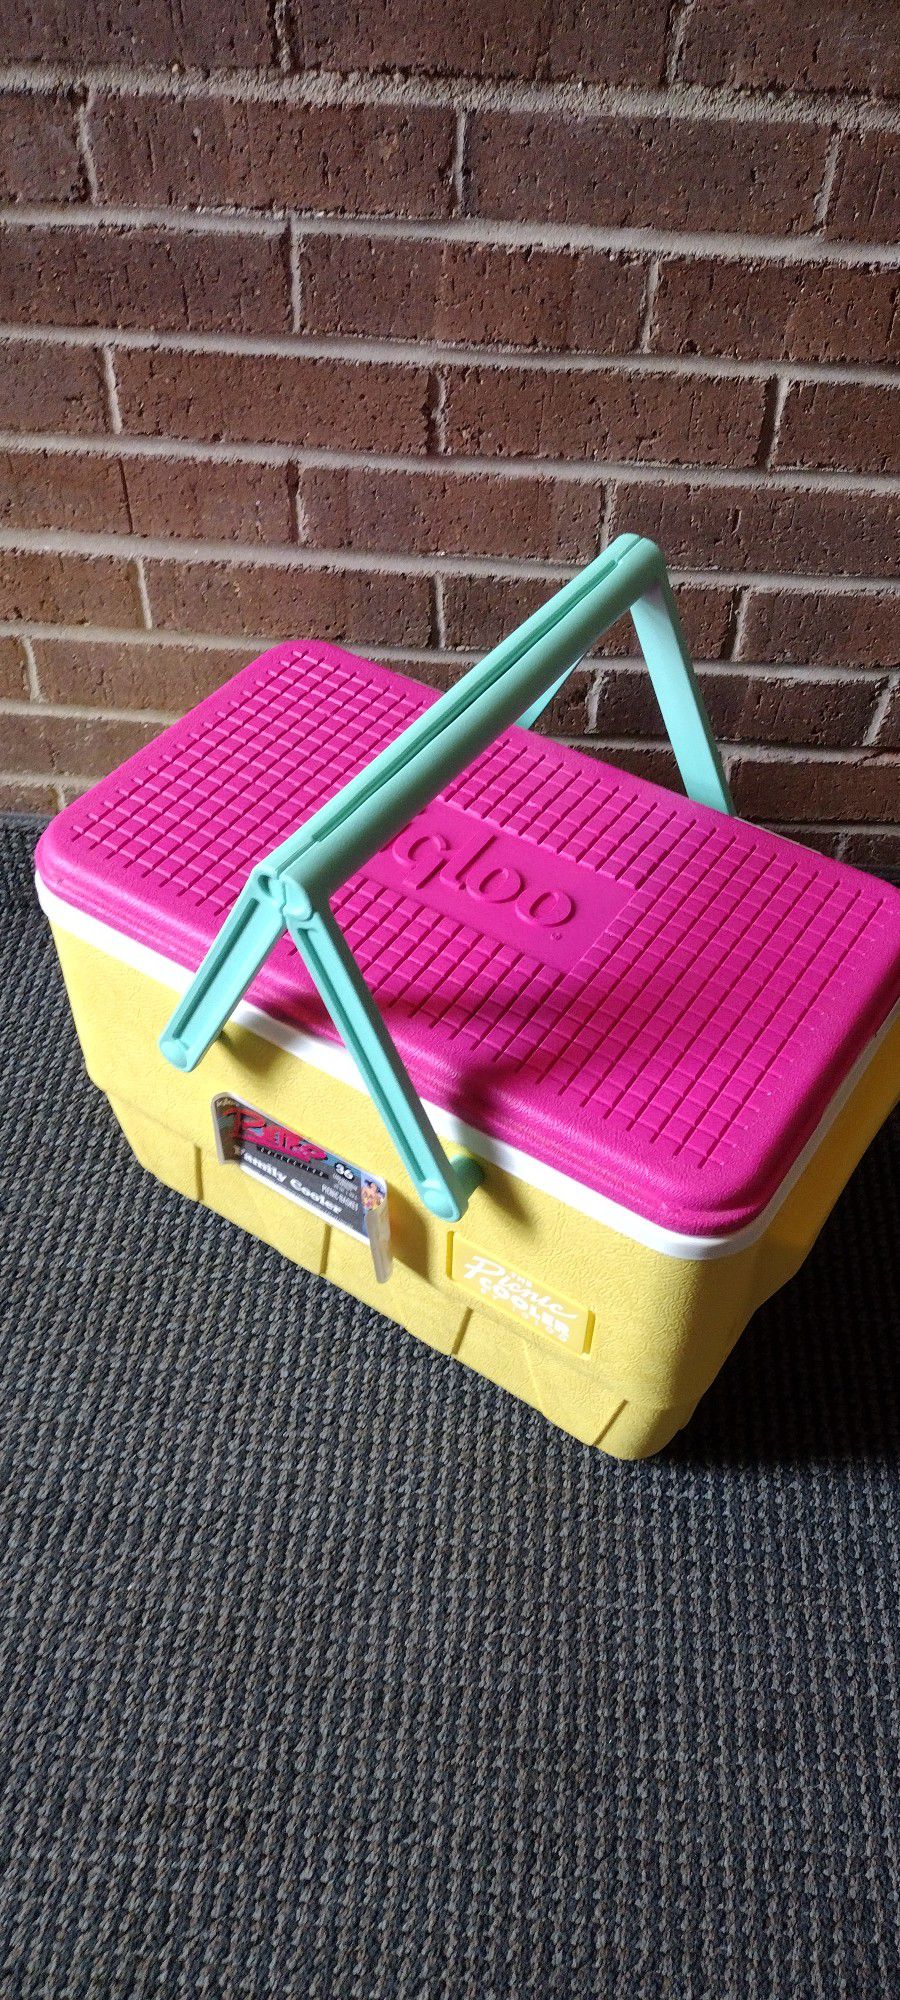 Retro Limited Edition 90’s Igloo Picinic Basket Cooler

